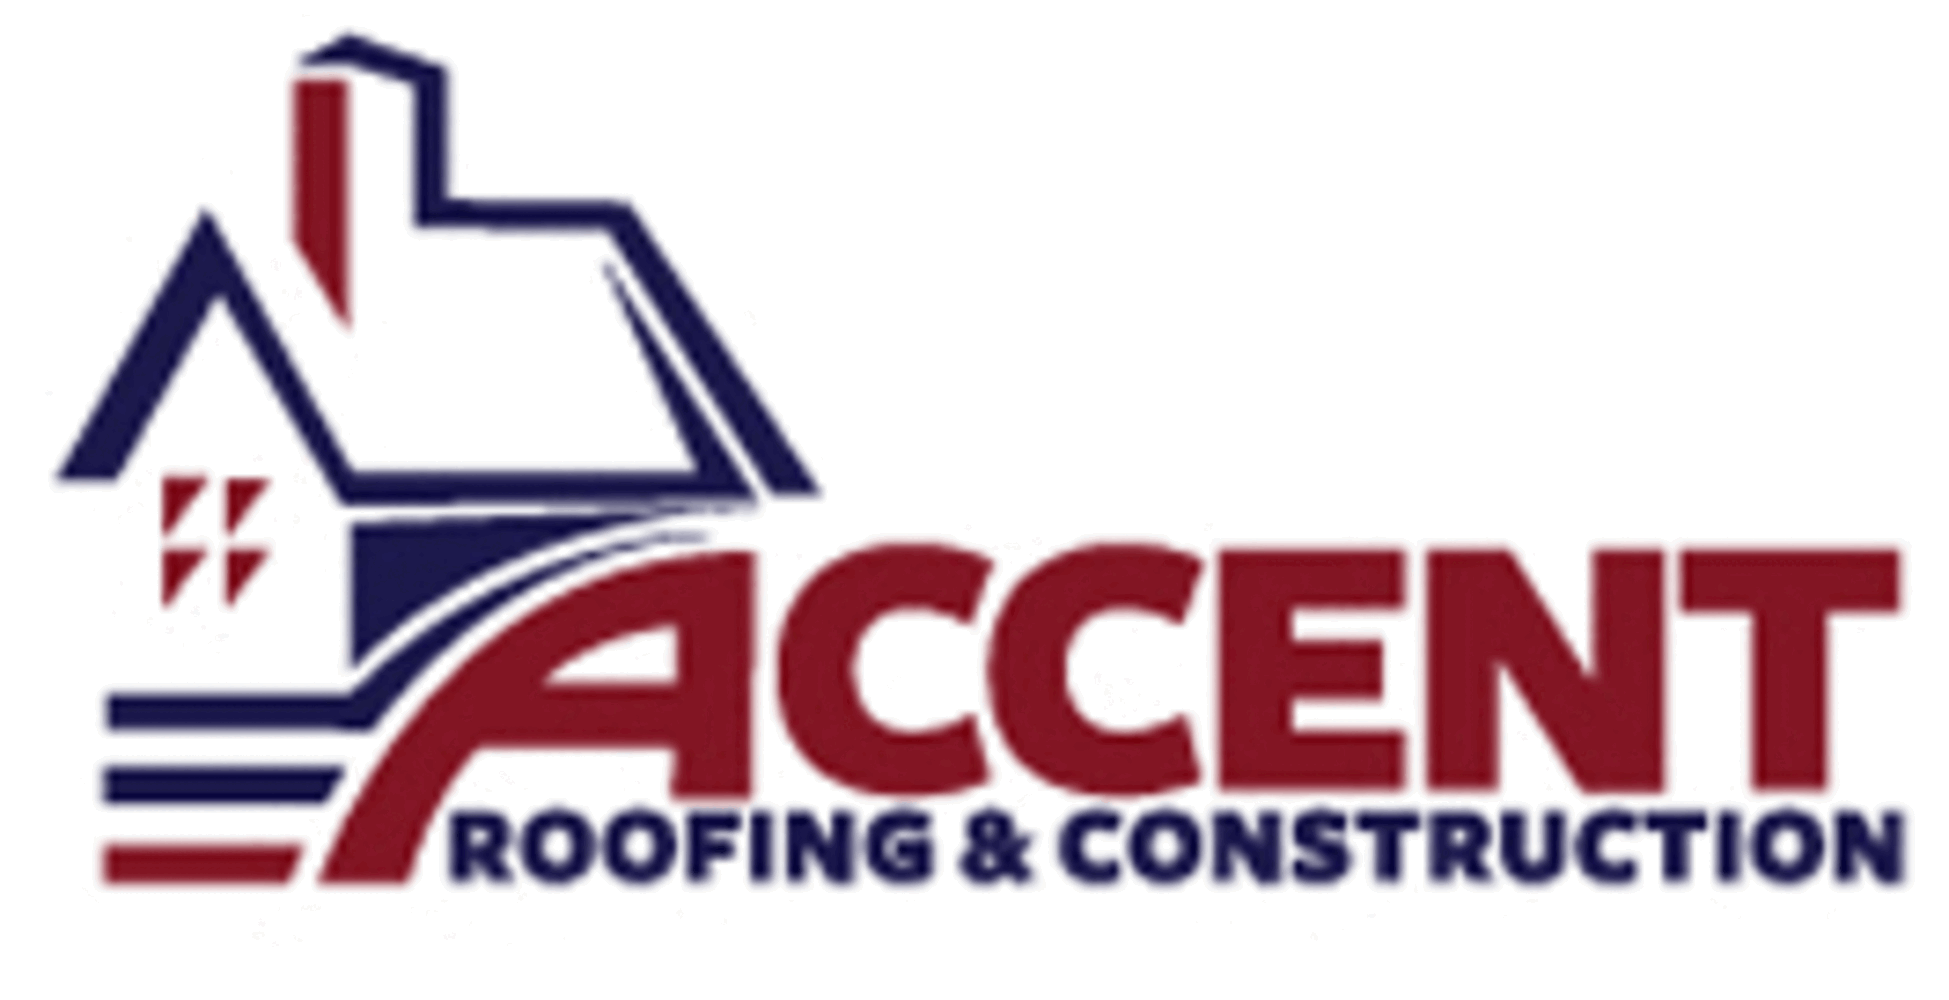 Photo(s) from Accent Roofing & Construction